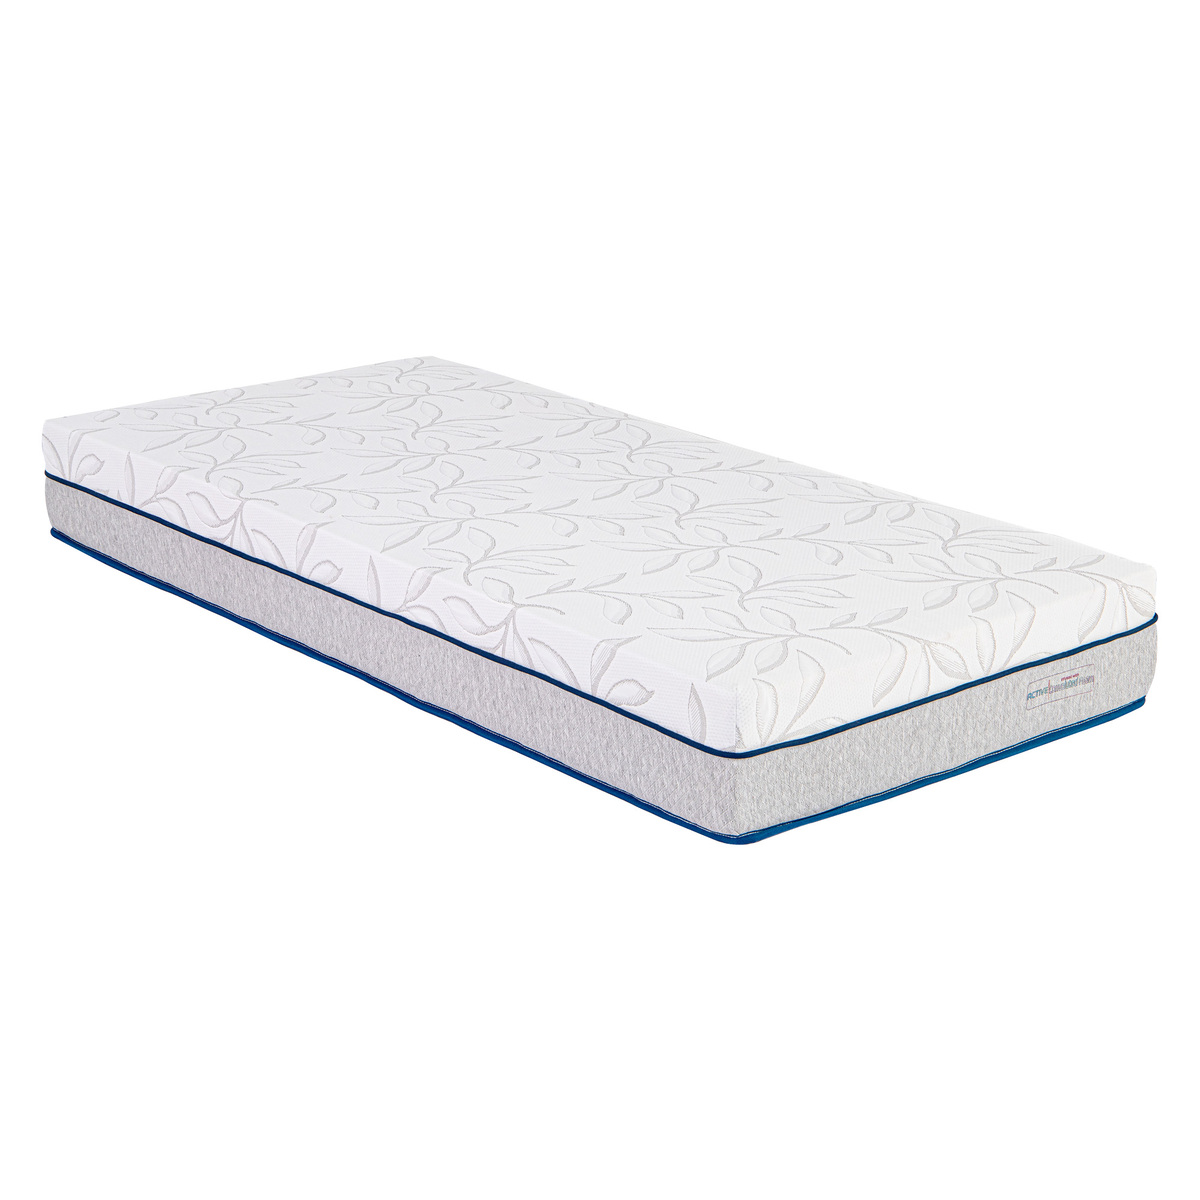 Royal Cozee Medical Gel Infused Mattress 200x100+20cm